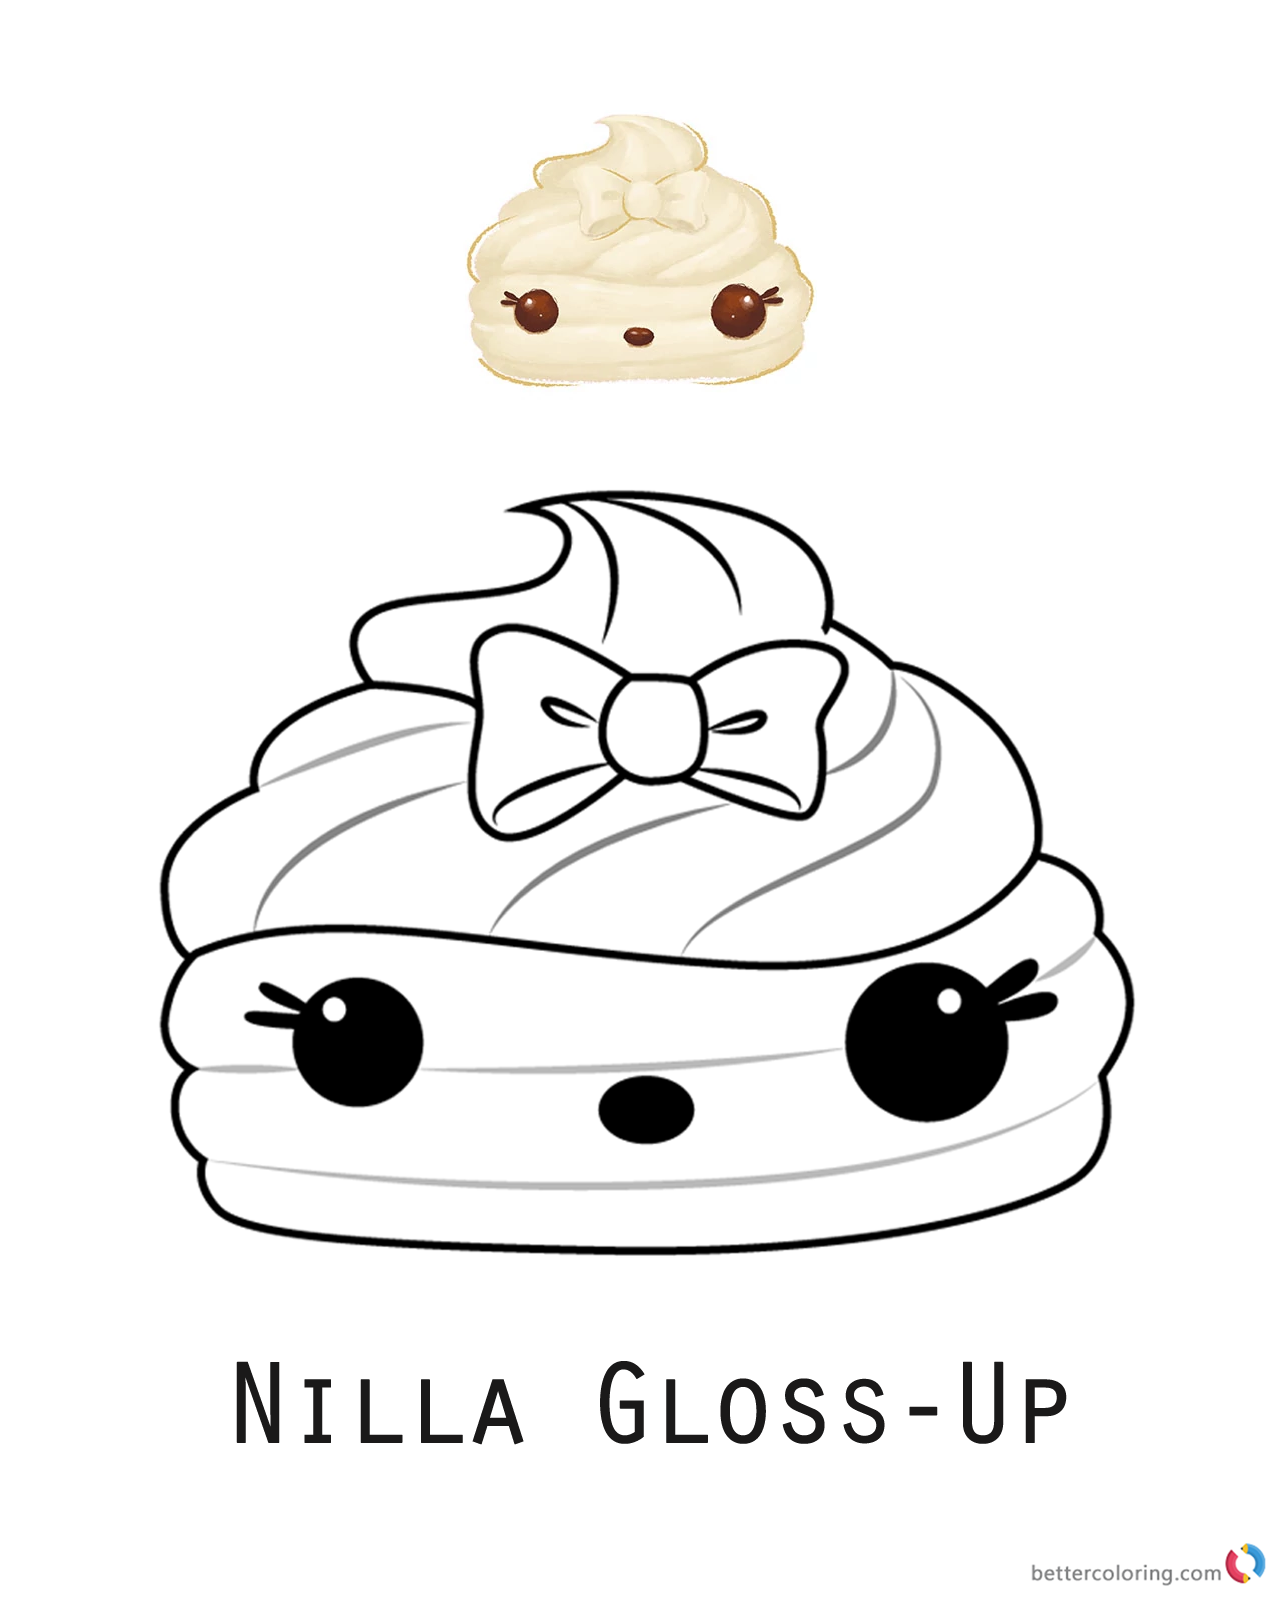 Nilla Gloss-Up from Num Noms coloring pages printable